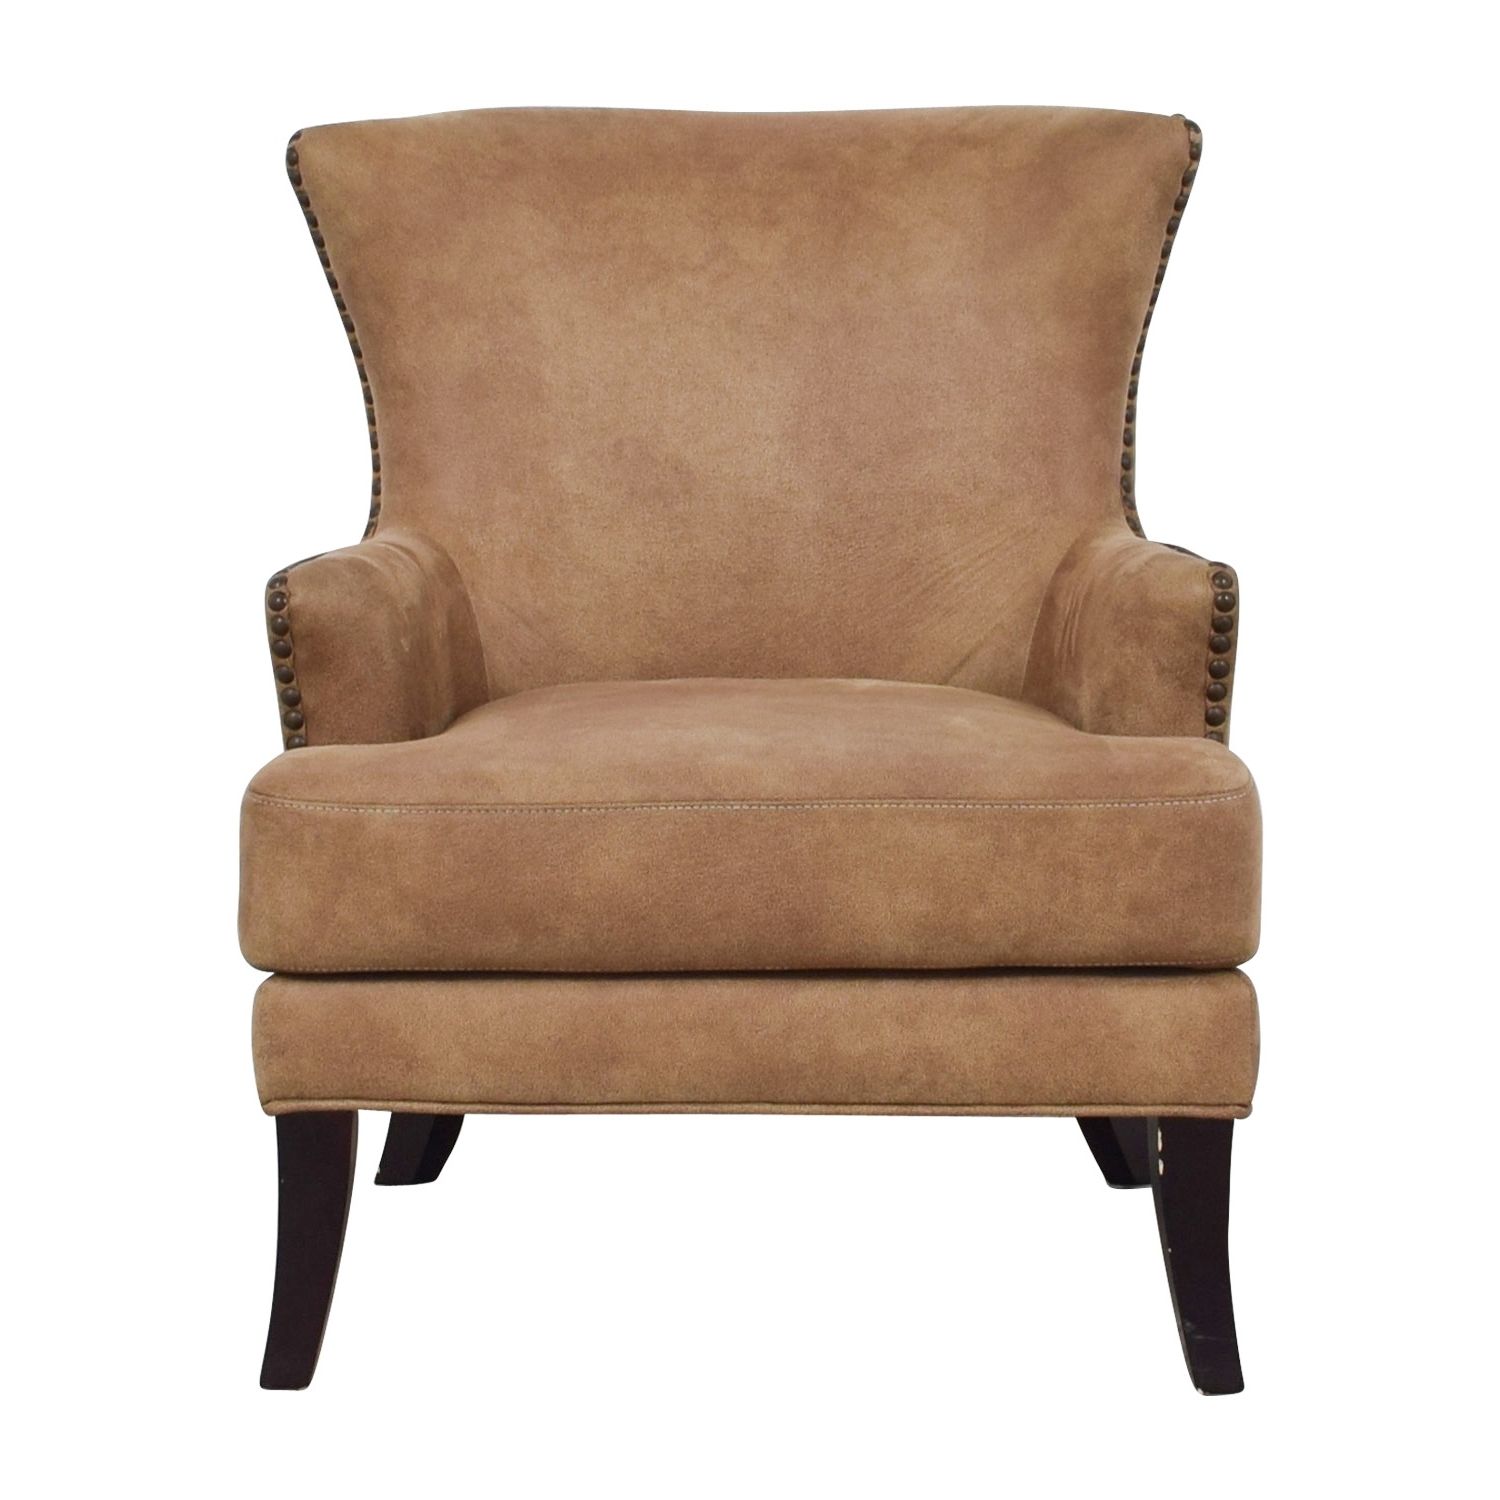 [%88% Off – Joss & Main Joss & Main Nola Brown Nailhead Arm Chair / Chairs Pertaining To Best And Newest Joss Side Chairs|joss Side Chairs Throughout 2017 88% Off – Joss & Main Joss & Main Nola Brown Nailhead Arm Chair / Chairs|best And Newest Joss Side Chairs Pertaining To 88% Off – Joss & Main Joss & Main Nola Brown Nailhead Arm Chair / Chairs|famous 88% Off – Joss & Main Joss & Main Nola Brown Nailhead Arm Chair / Chairs Within Joss Side Chairs%] (View 13 of 20)